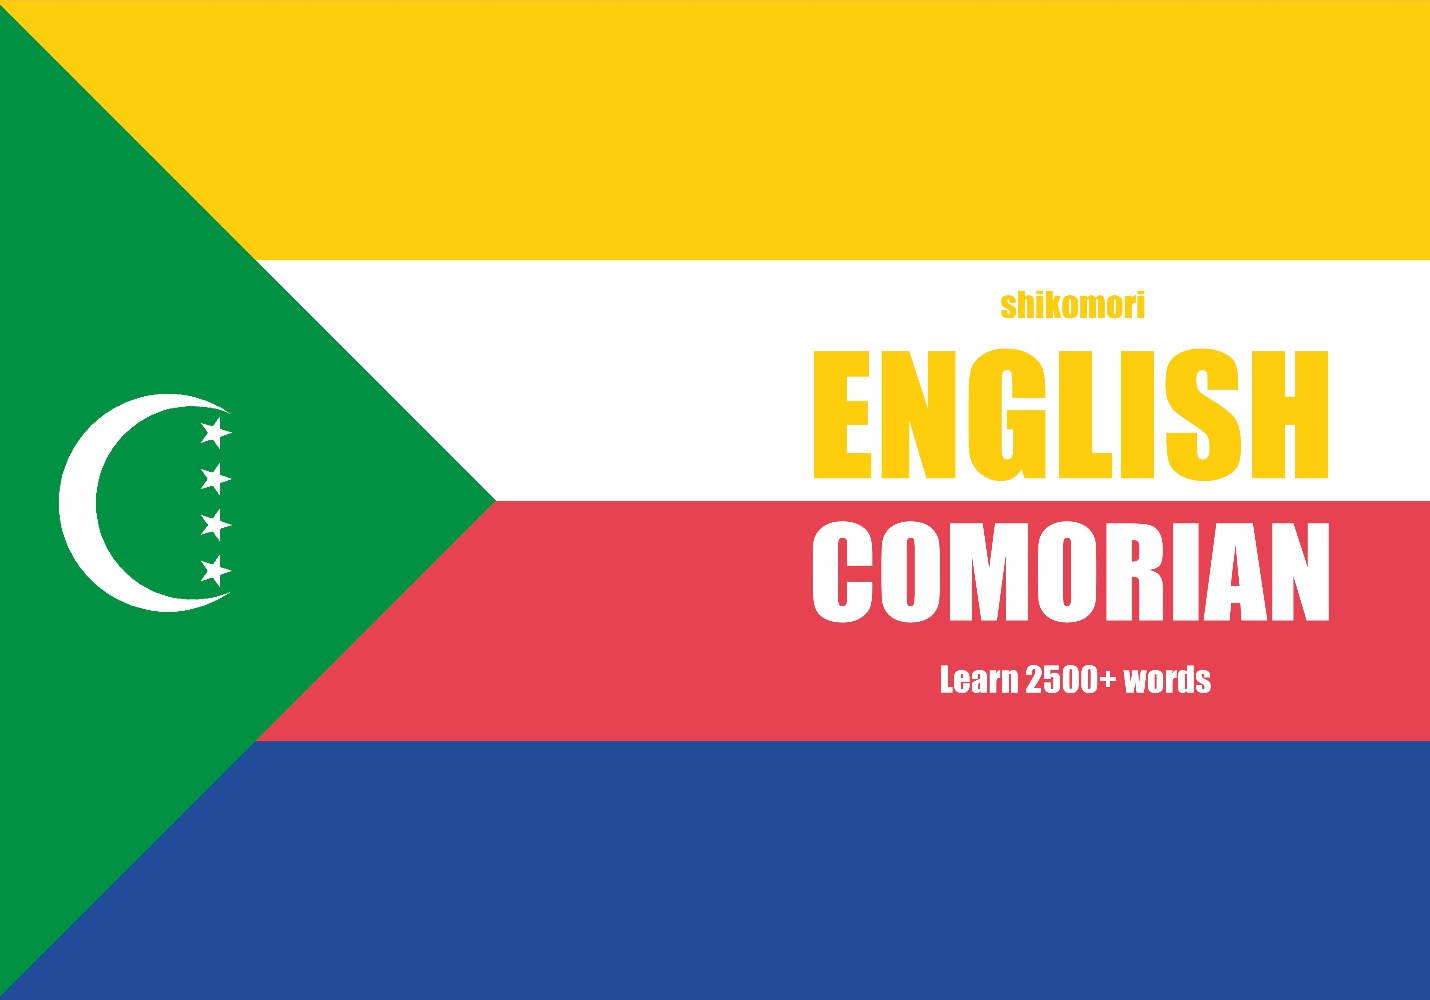 Comorian language learning notebook cover